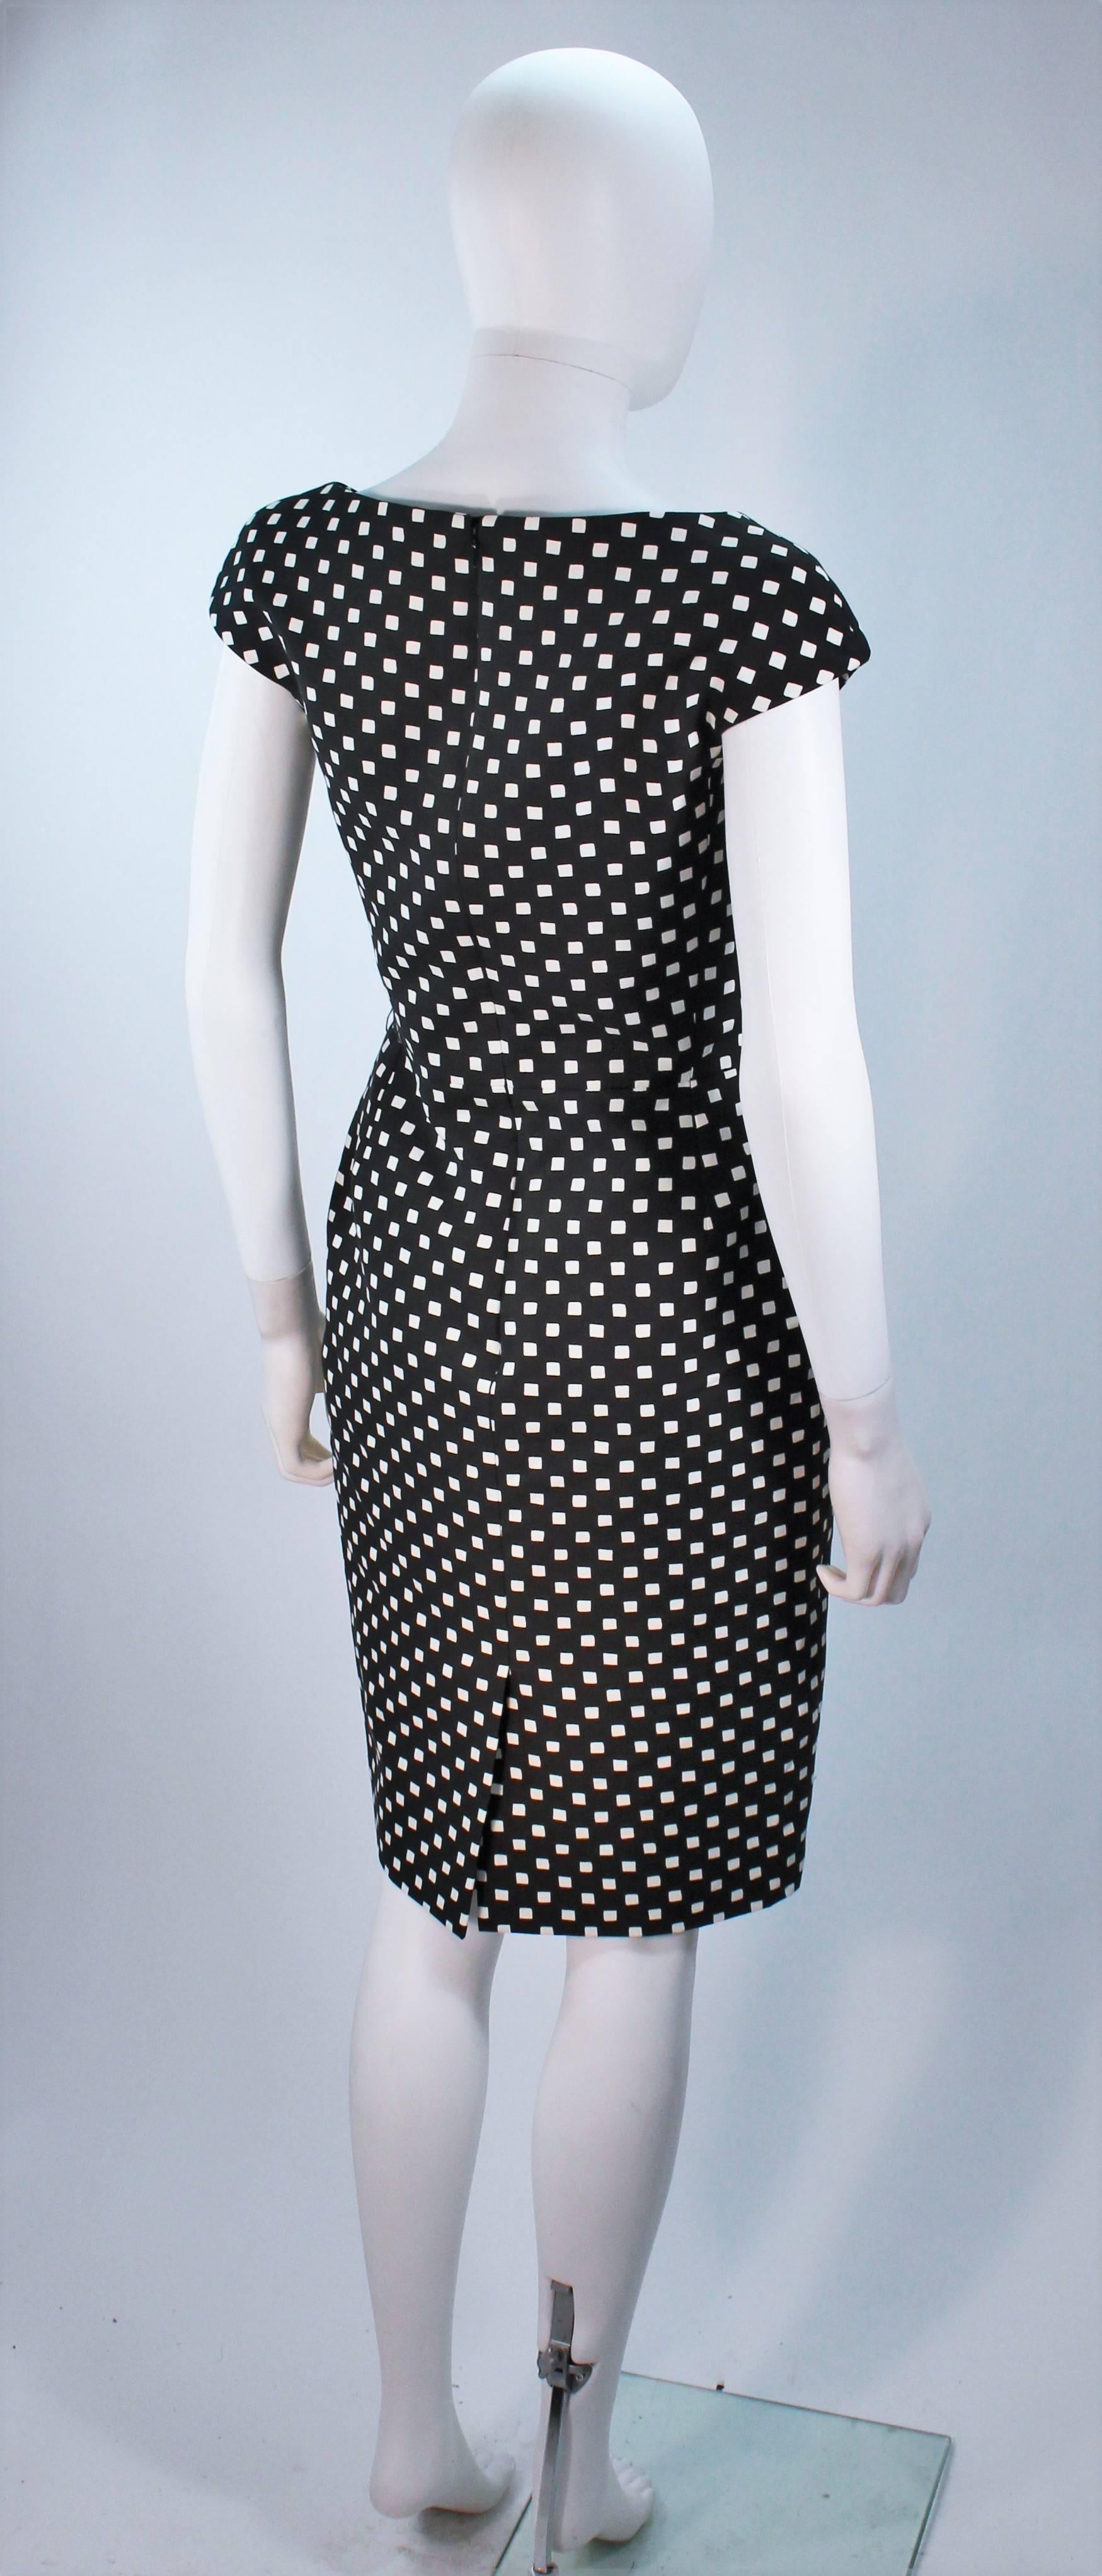 CHRISTIAN DIOR Black and White Checkered Cocktail Dress Size 42 6 4